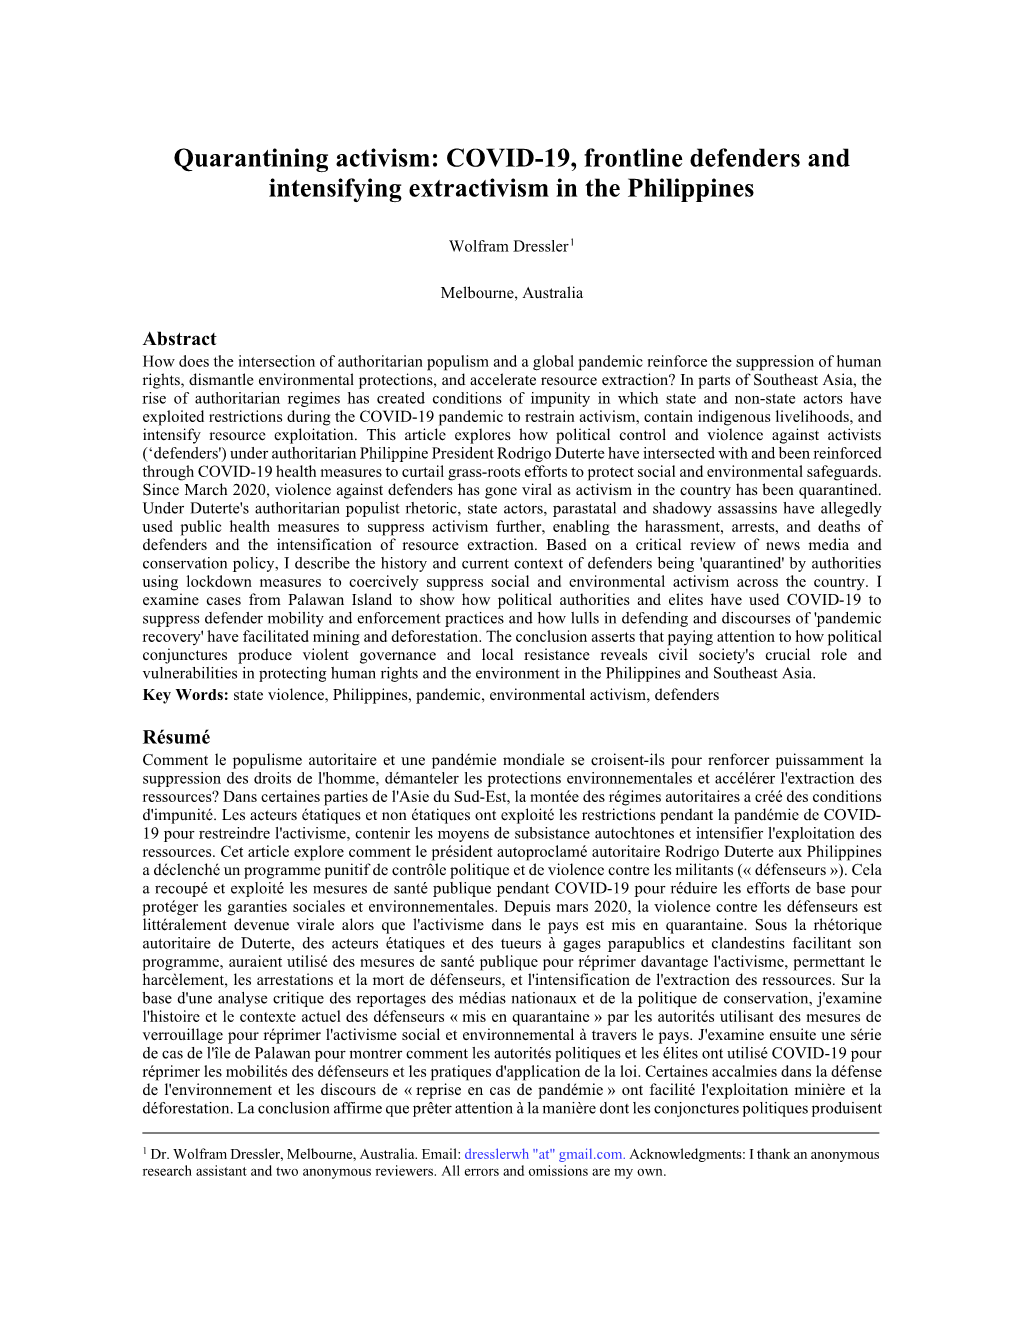 Quarantining Activism: COVID-19, Frontline Defenders and Intensifying Extractivism in the Philippines